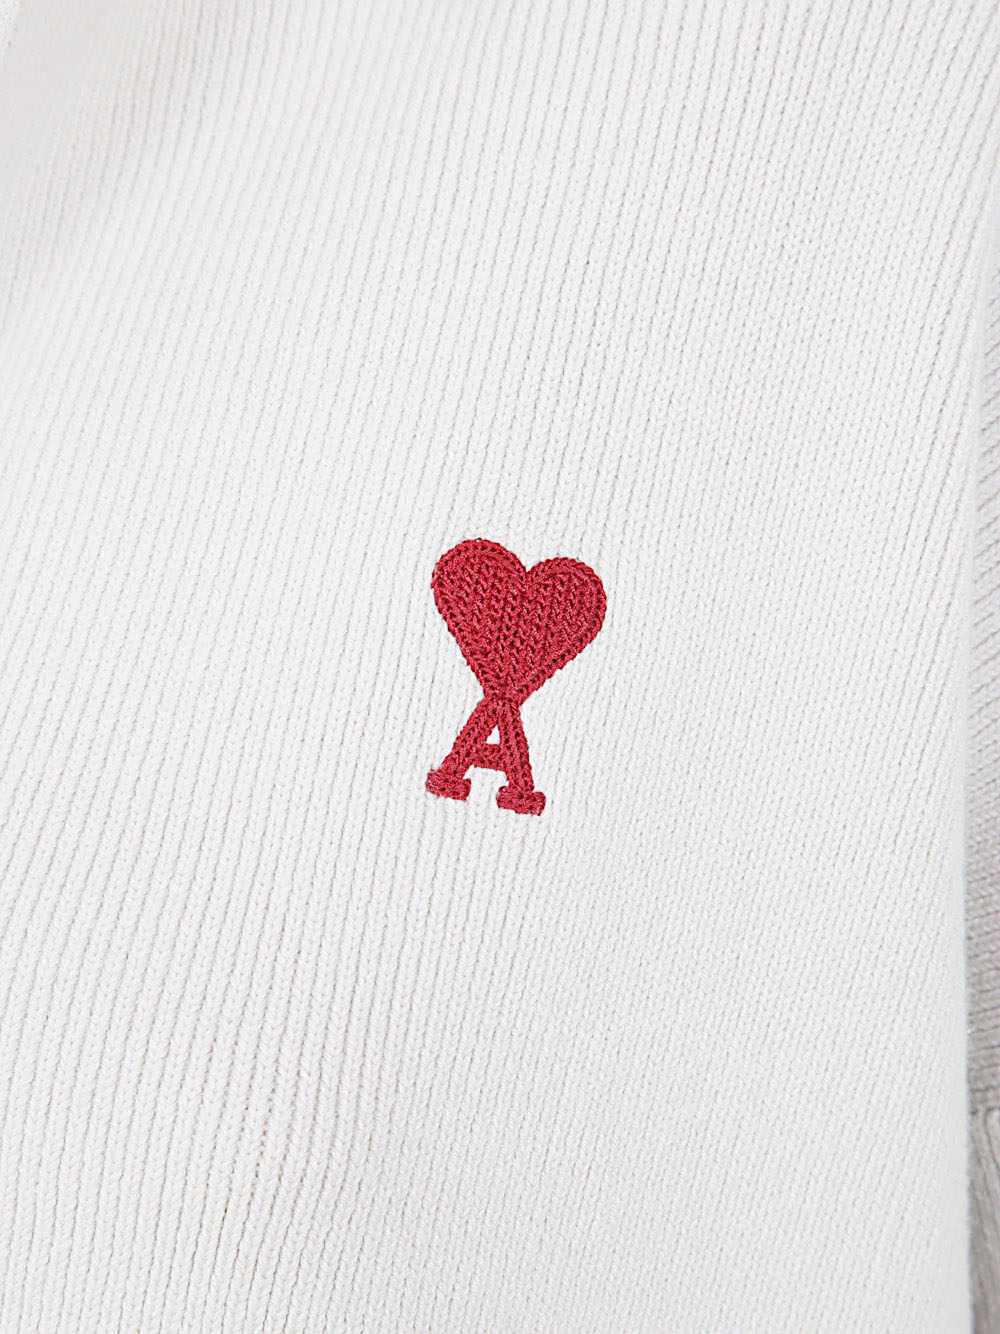 Red Adc Polo